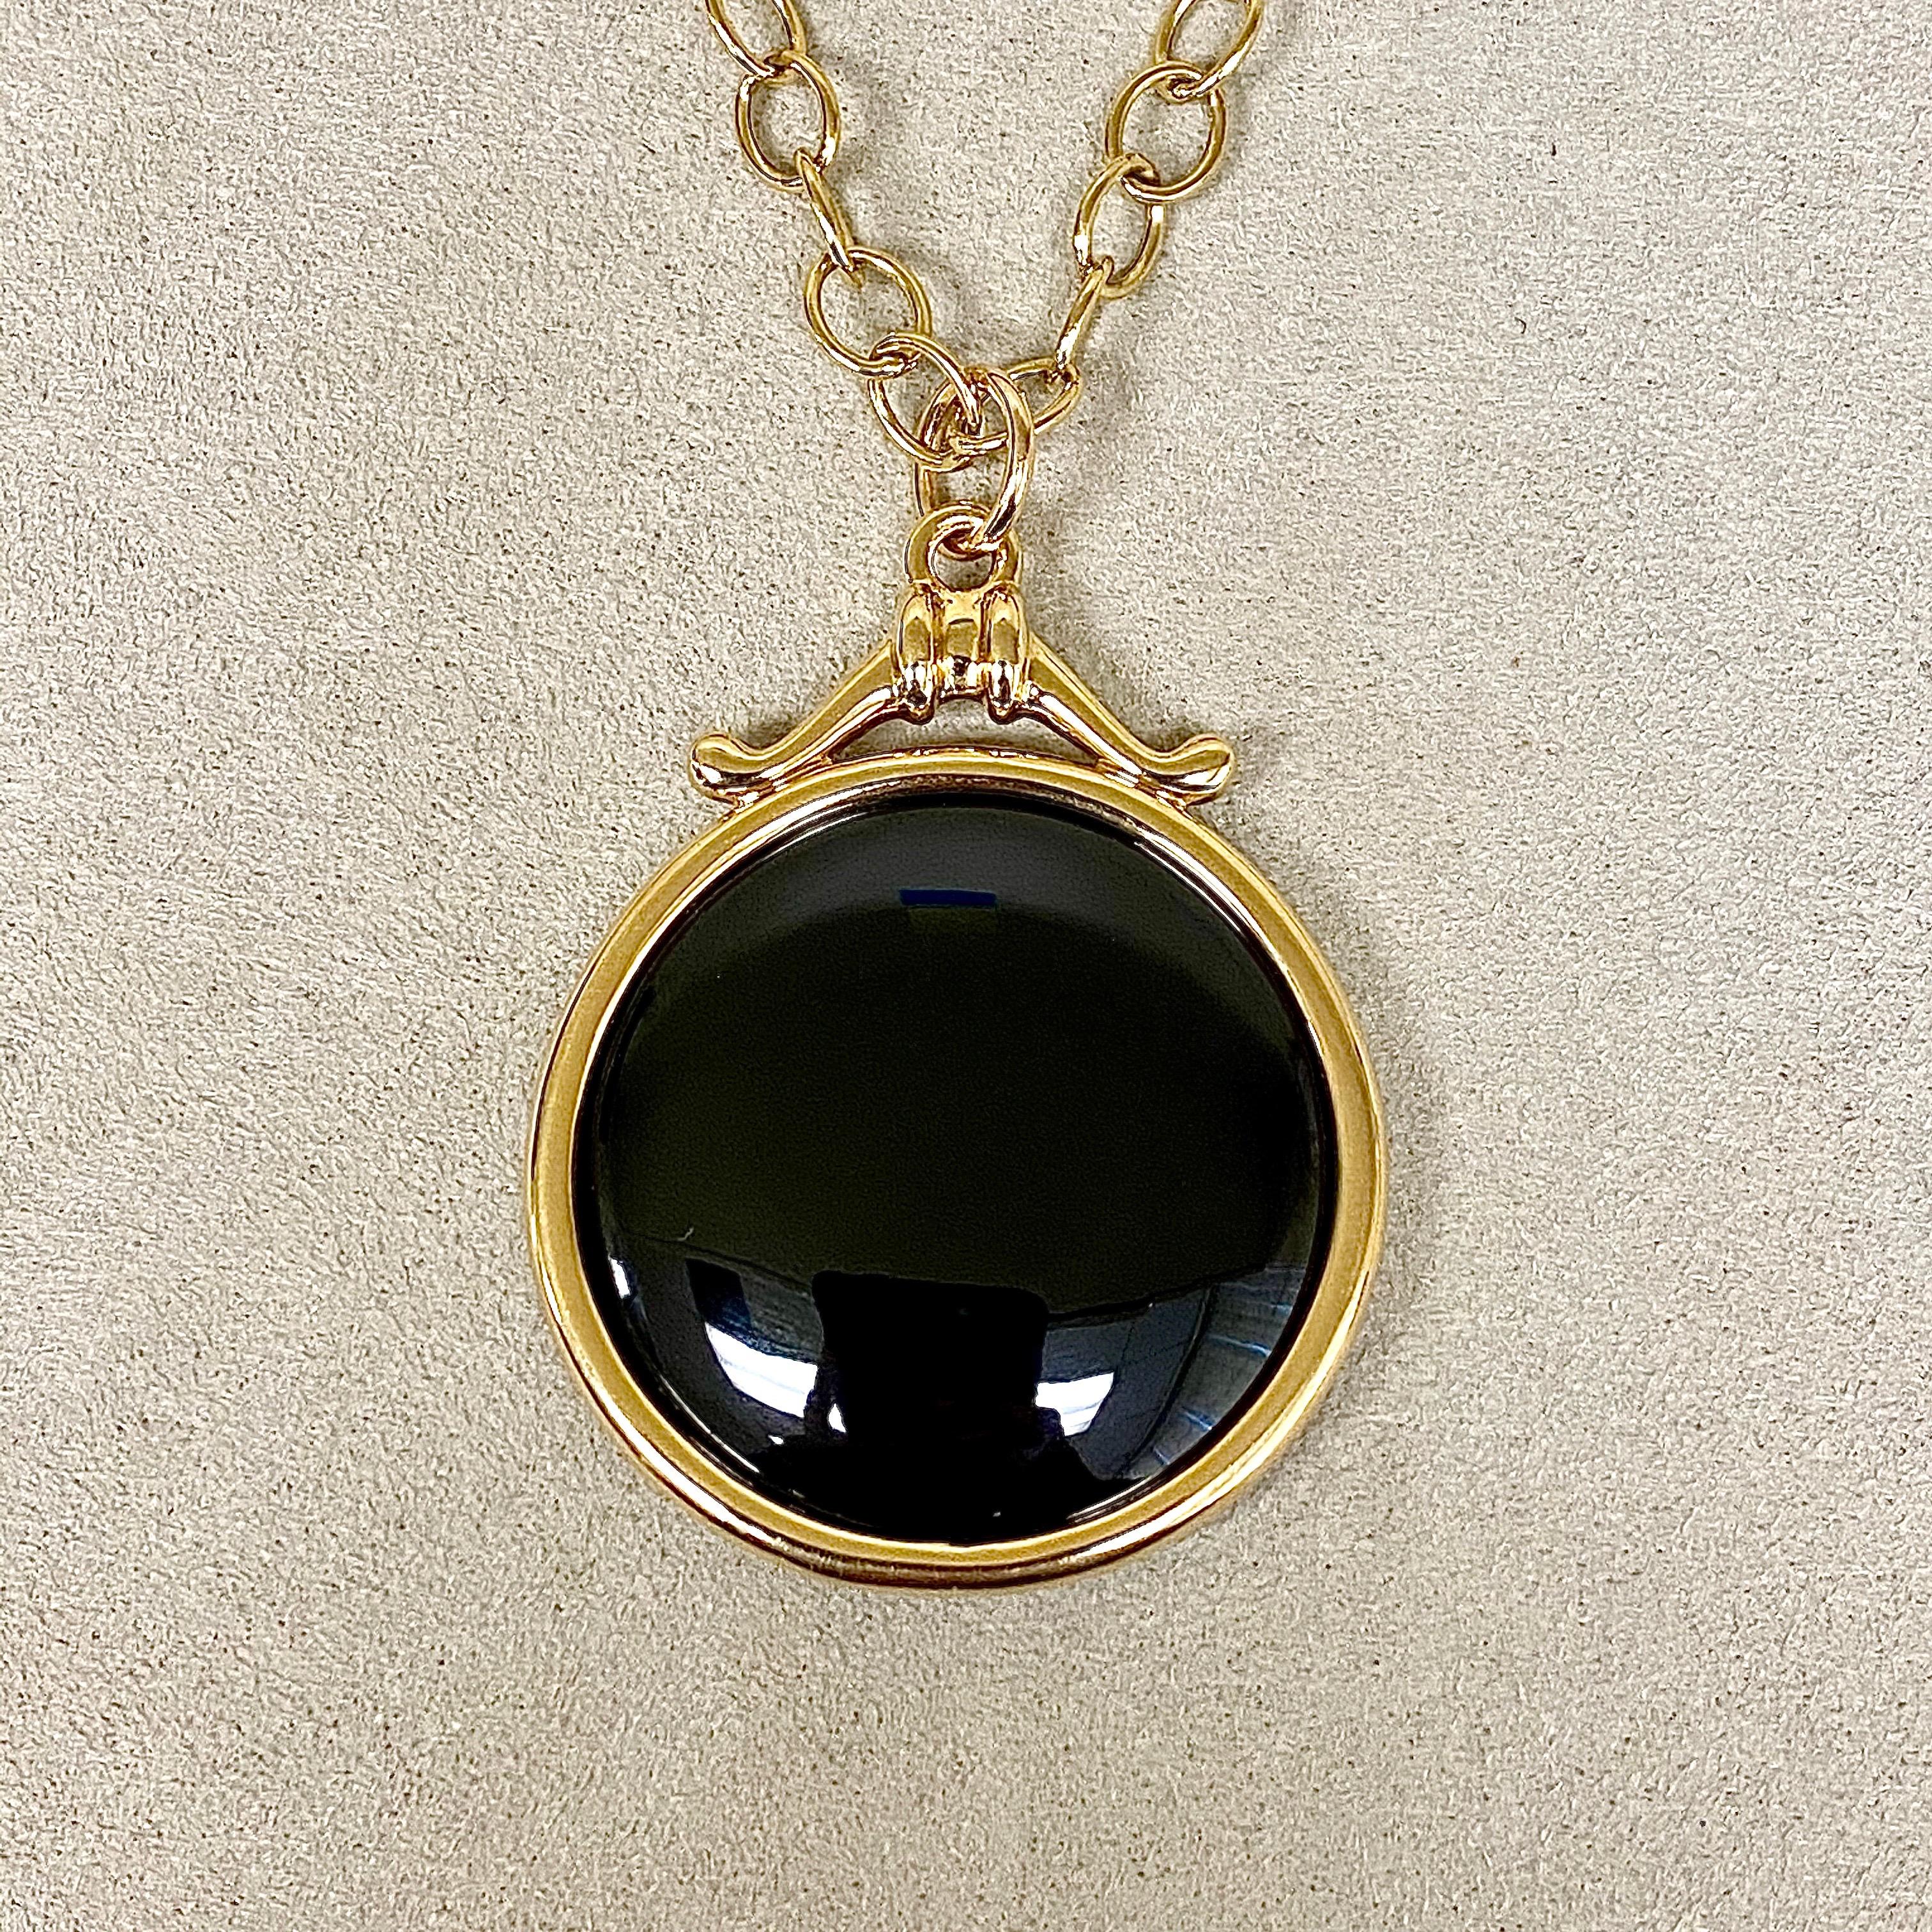 Created in 18 karat yellow gold
Black Spinel 50 cts approx
Chain sold separately
Limited Edition

Envisioned with 18-karat yellow-gold and 50 carats of Black Spinel, this exclusive, limited-edition pendant is a masterpiece. Note: Chain sold